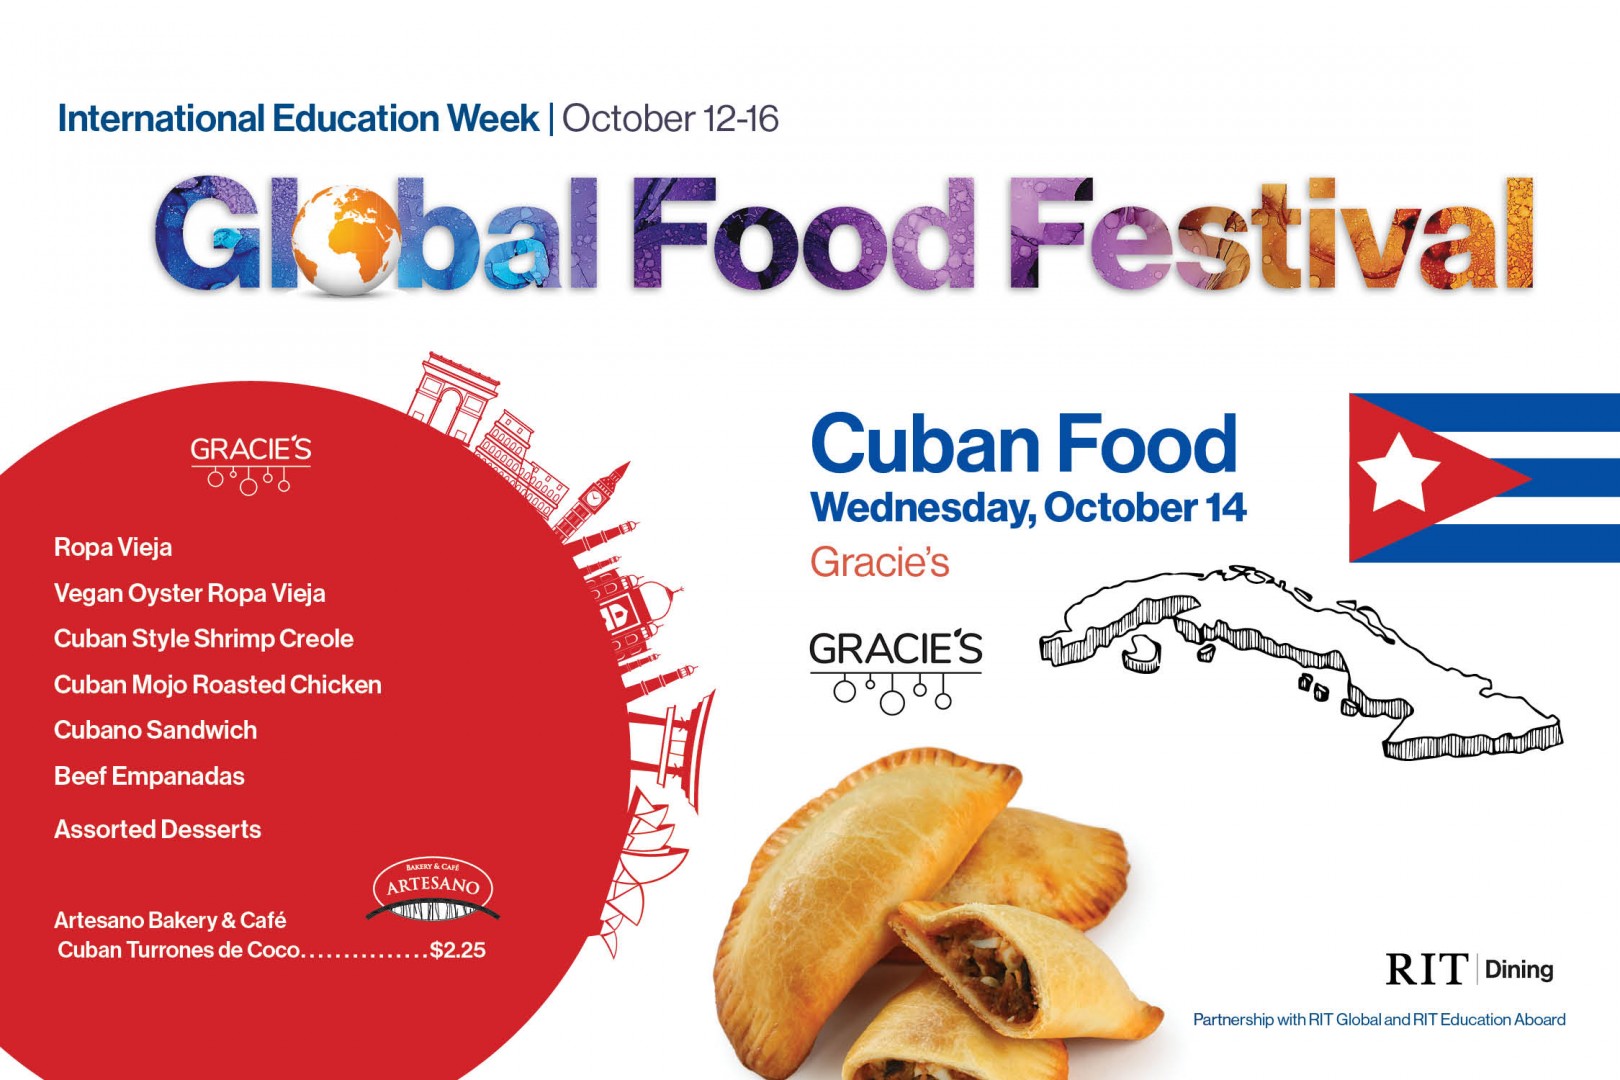 Graphic with text "Global Food Festival", "Cuban Food", and outline of country